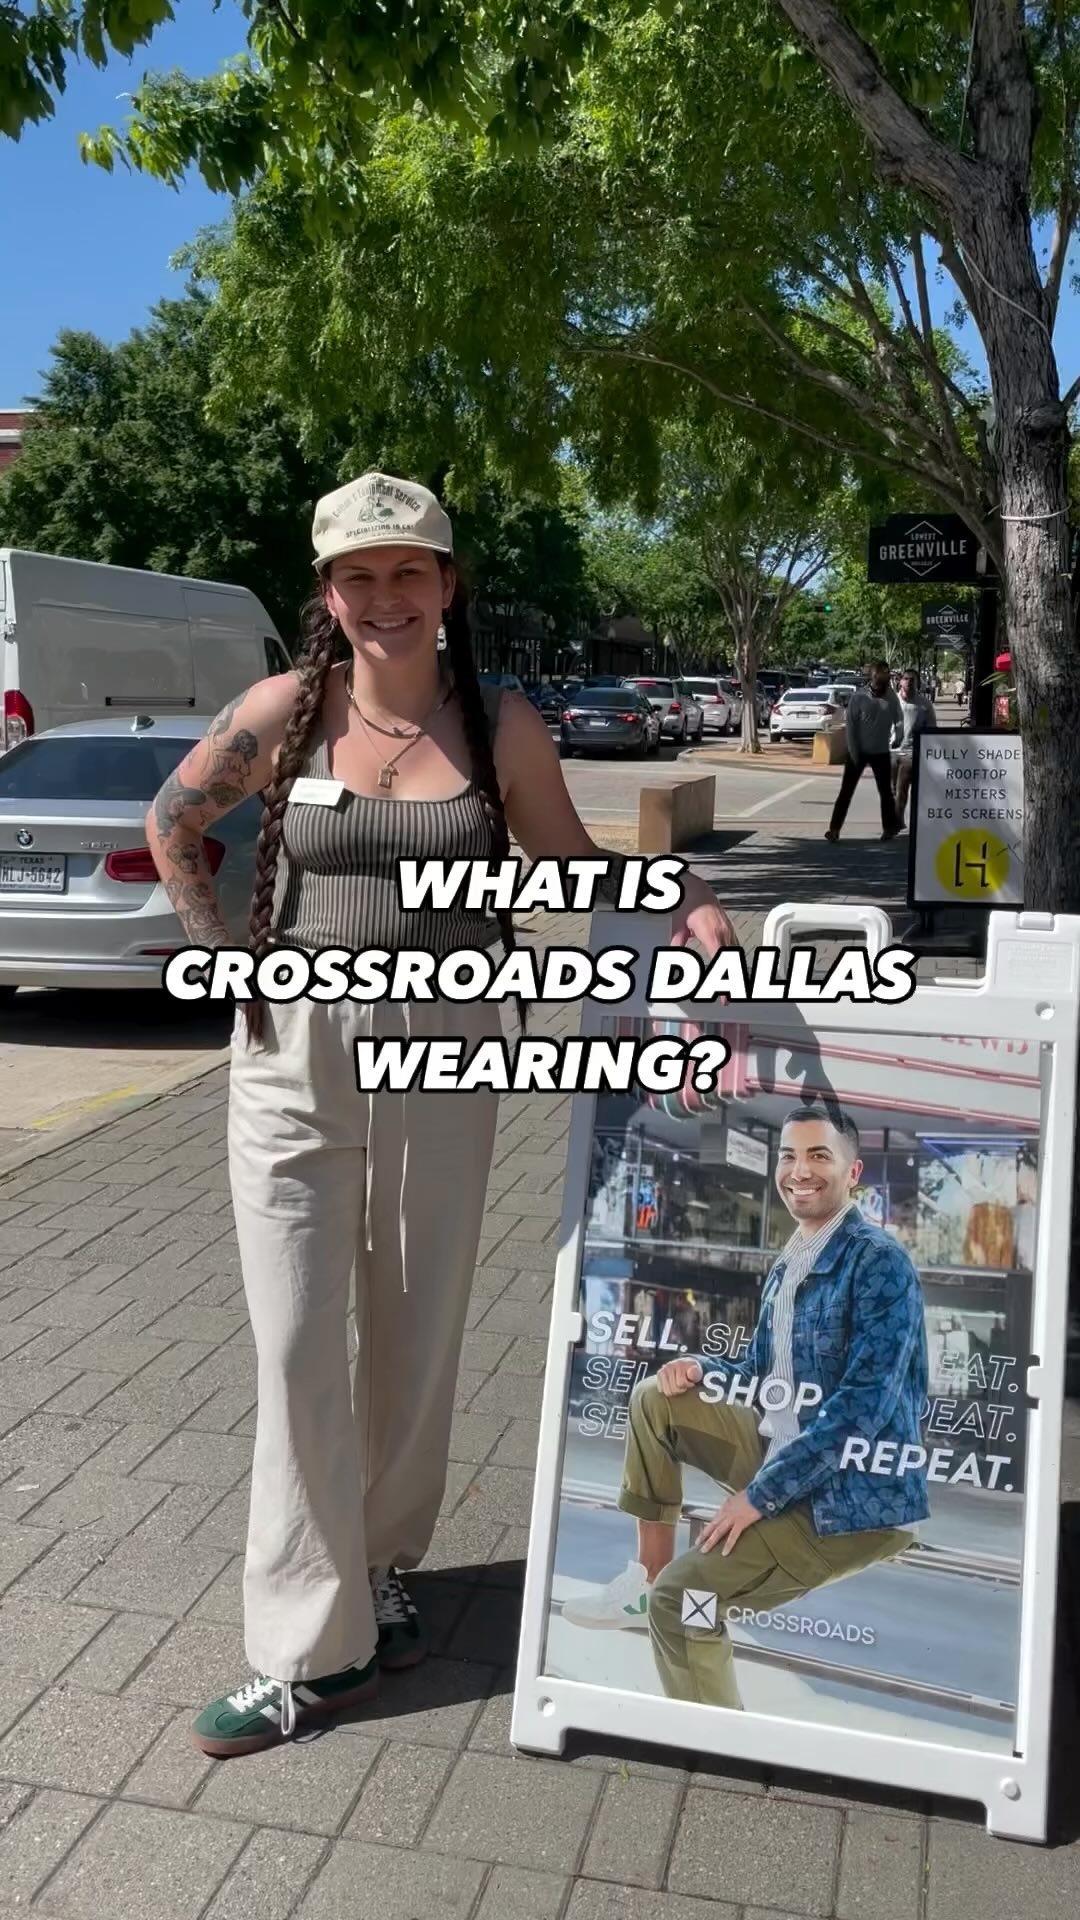 WHAT IS CROSSROADS DALLAS WEARING?

Fit check with our Lower Greenville, Dallas team! Check out their style and all their fabulous #crossroadsfinds!

Looking to refresh your wardrobe? Visit your local Crossroads to shop secondhand styles you’ll love for the upcoming season. Click the link in our bio to Find a Store Near You. 🧡

🎥: Crossroads Lower Greenville @crossroads_dallas 

#crossroadstrading #crossroadsfinds #crossroadsstore #fashionfinds #buyselltrade #style #thriftfinds #consignment #shopping #womensfashion #mensfashion #fashionblogger #ootd #fashion #thrift #sustainablefashion #secondhandfirst #shopthrift #consignment #thrifted